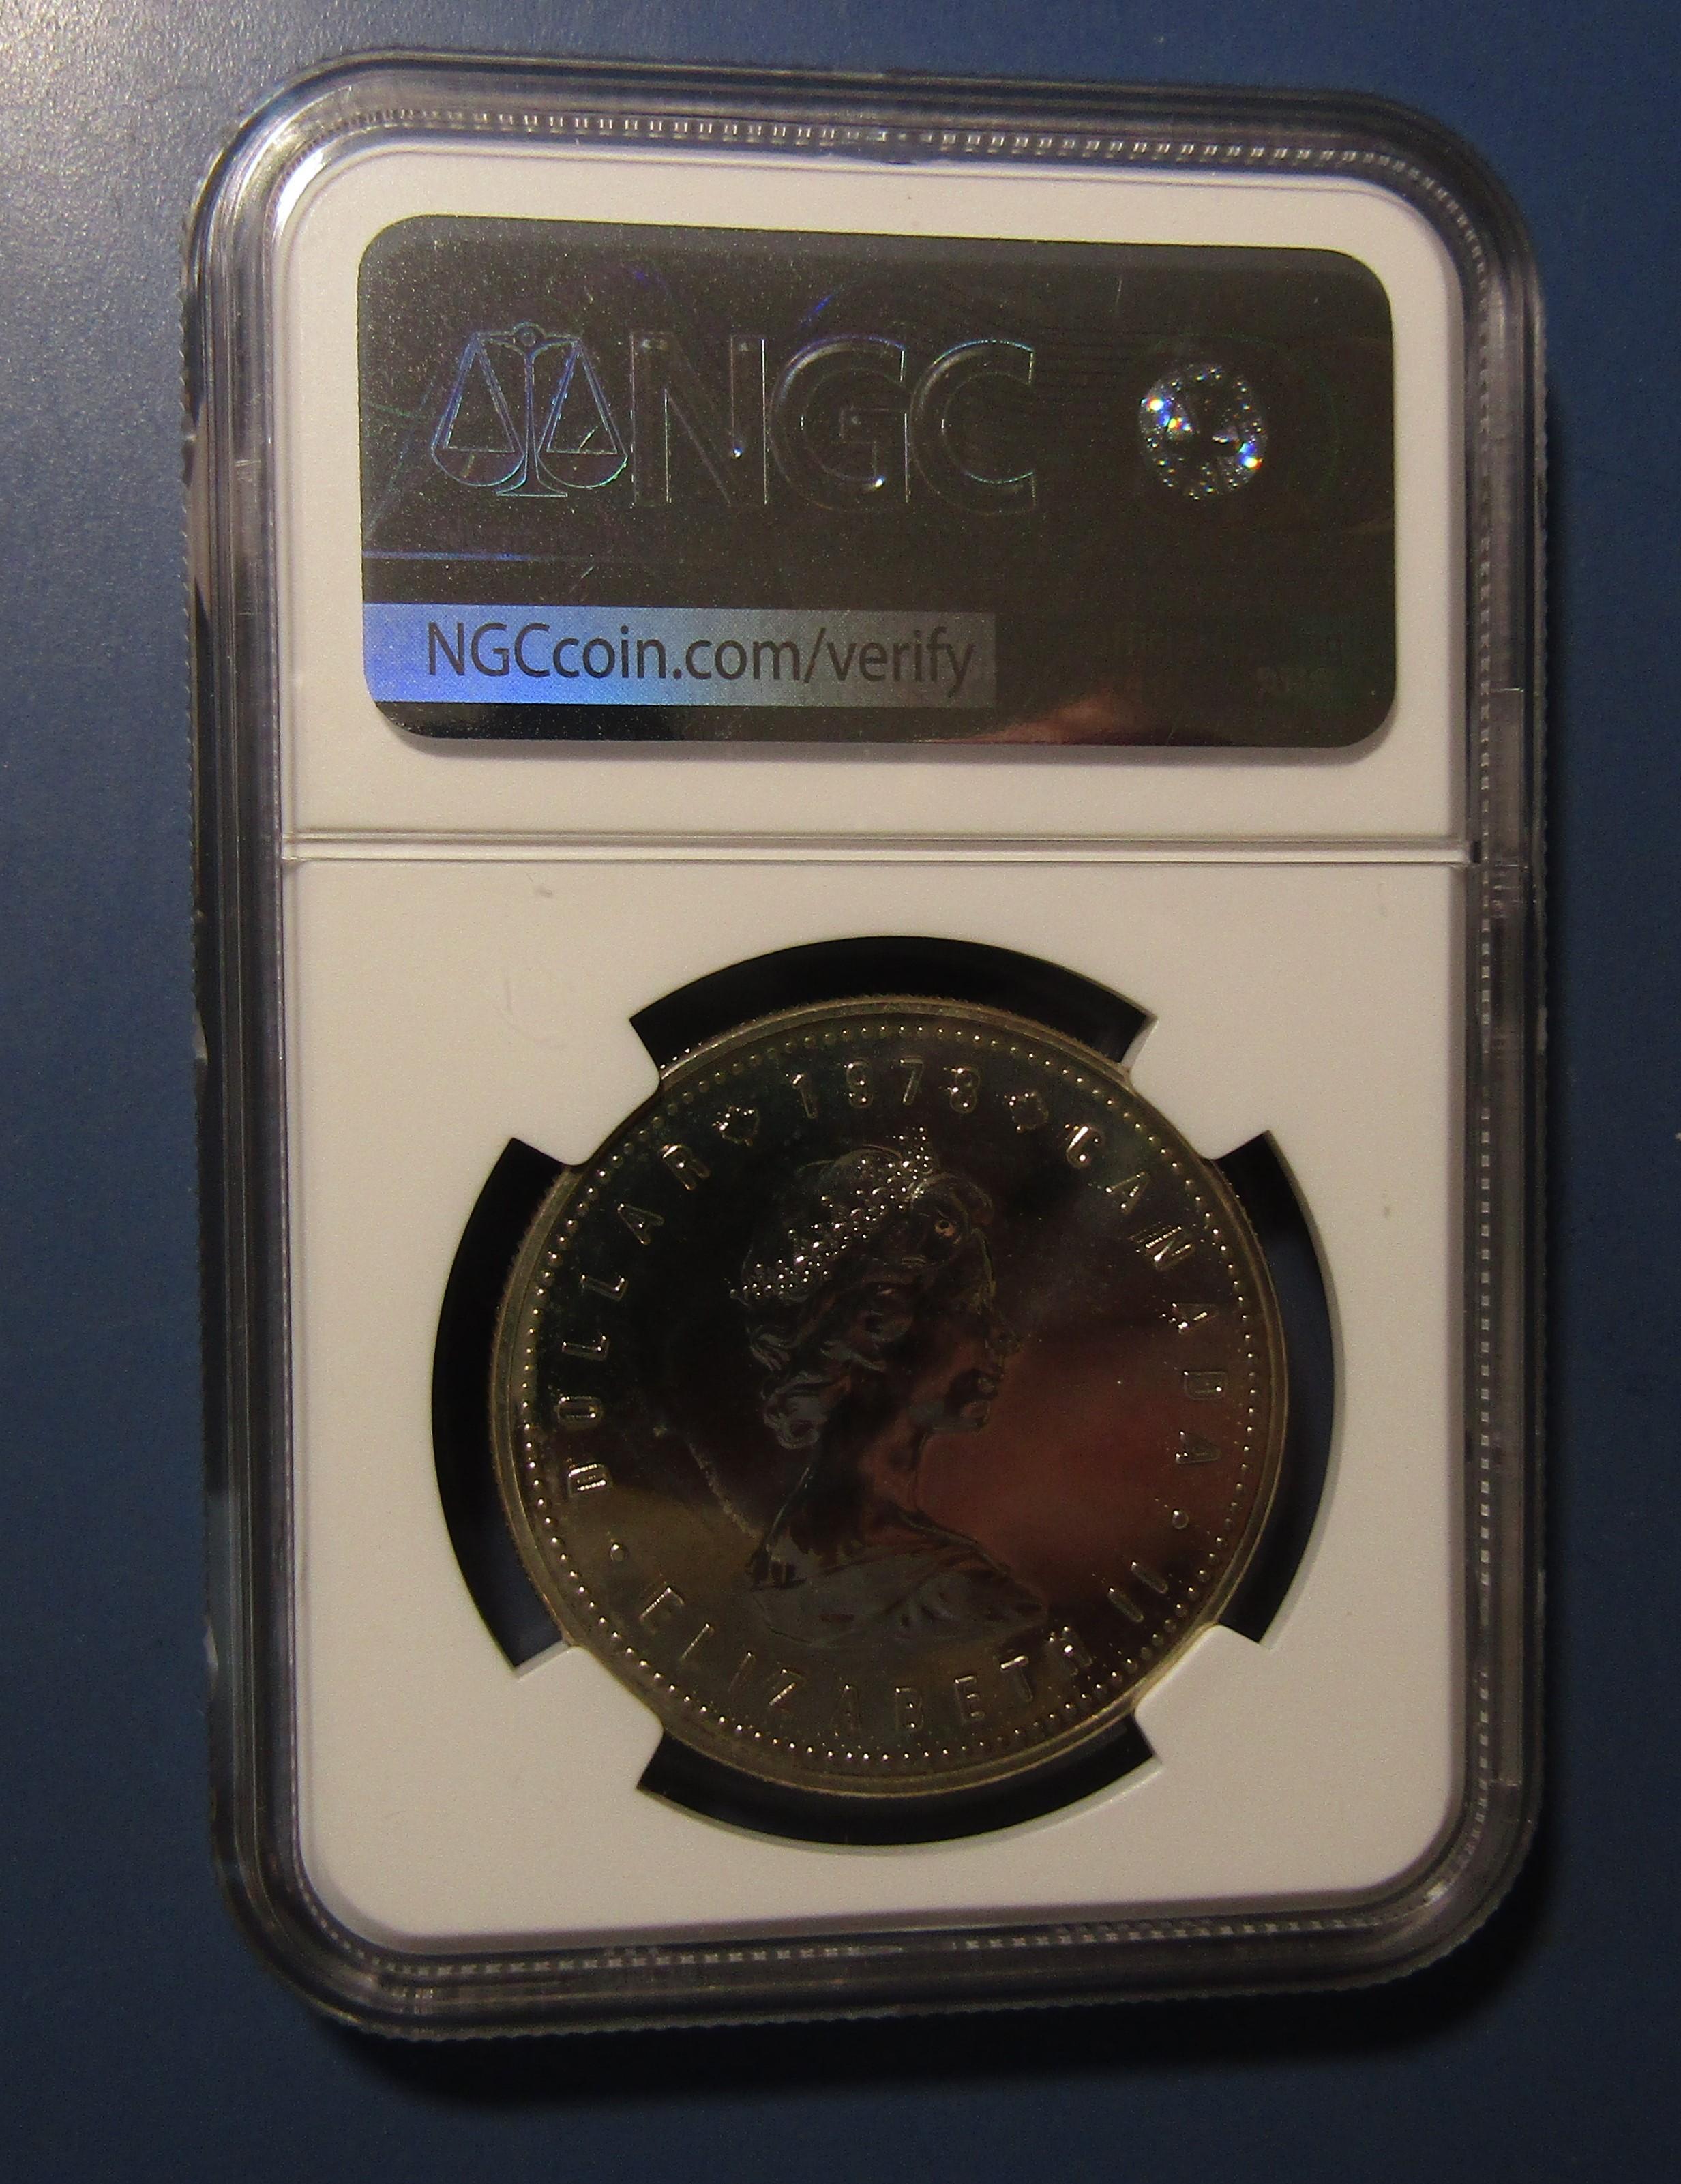 1978 CANADA COMMONWEALTH GAMES DOLLAR NGC SP-66